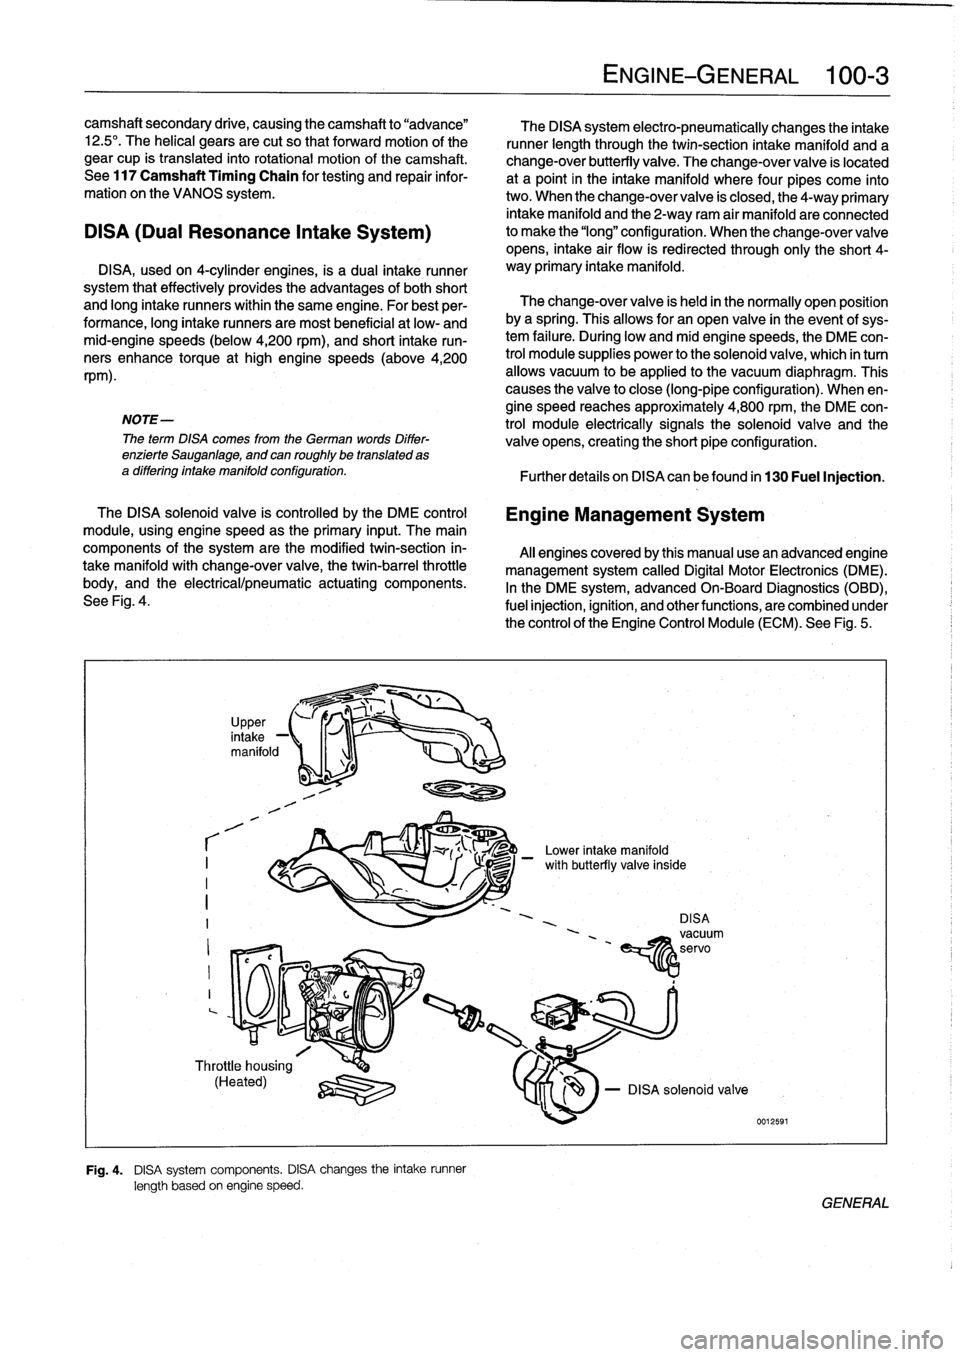 BMW 318i 1995 E36 Workshop Manual camshaft
secondary
drive,
causing
thecamshaft
to
"advance"

12
.5°
.
The
helical
gears
are
cut
so
that
forward
motion
of
the

gear
cup
is
transiated
into
rotational
motion
of
the
camshaft
.

See
117
